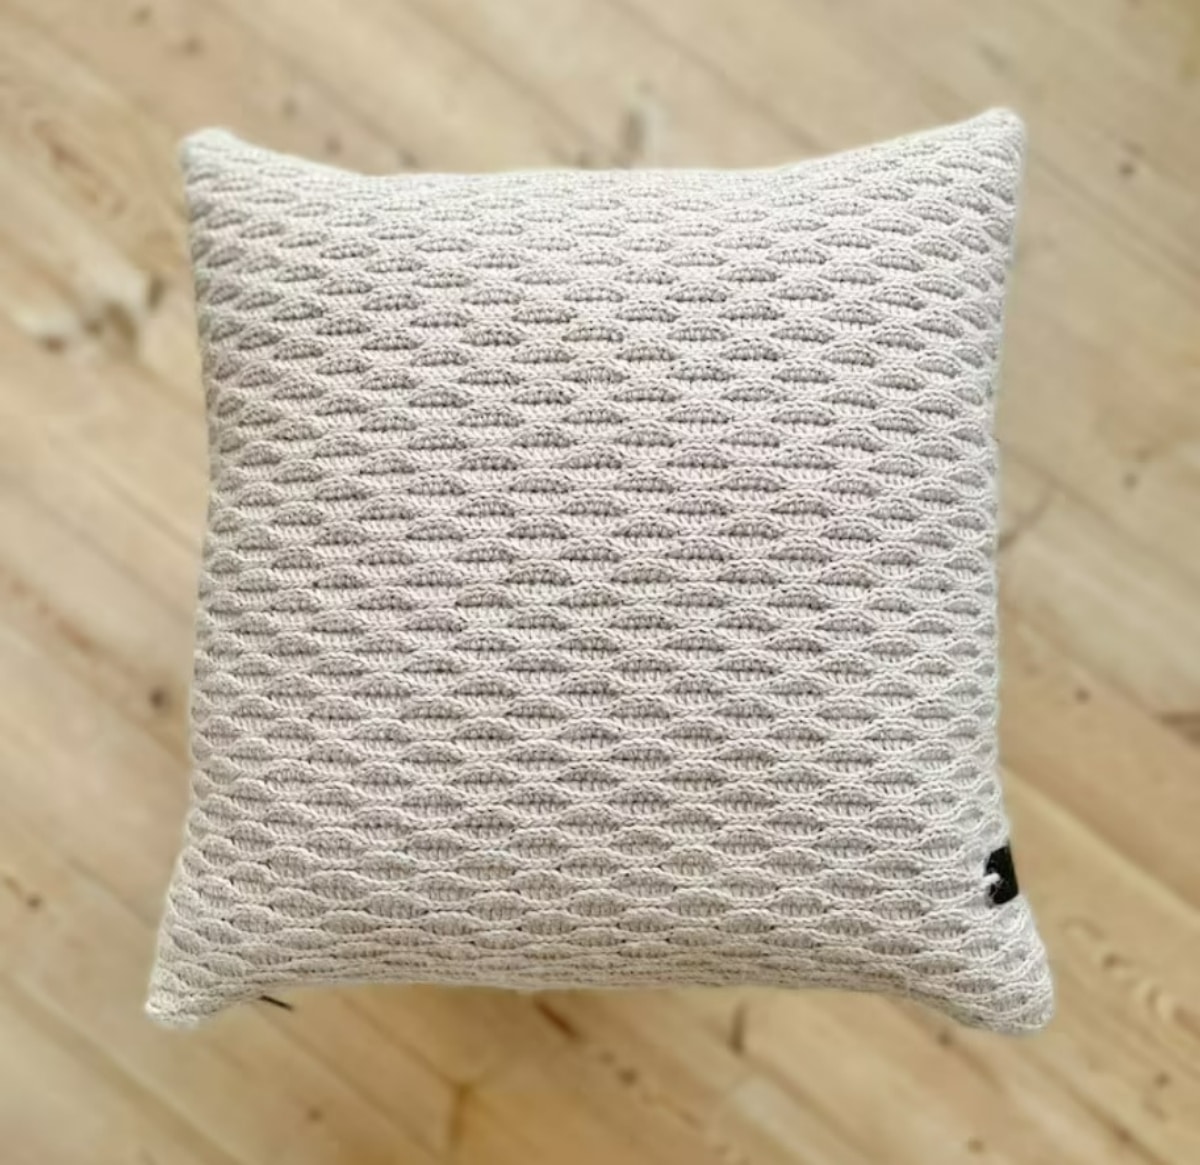 Cream crochet cushion with a textured 3-D effect on wooden flooring.